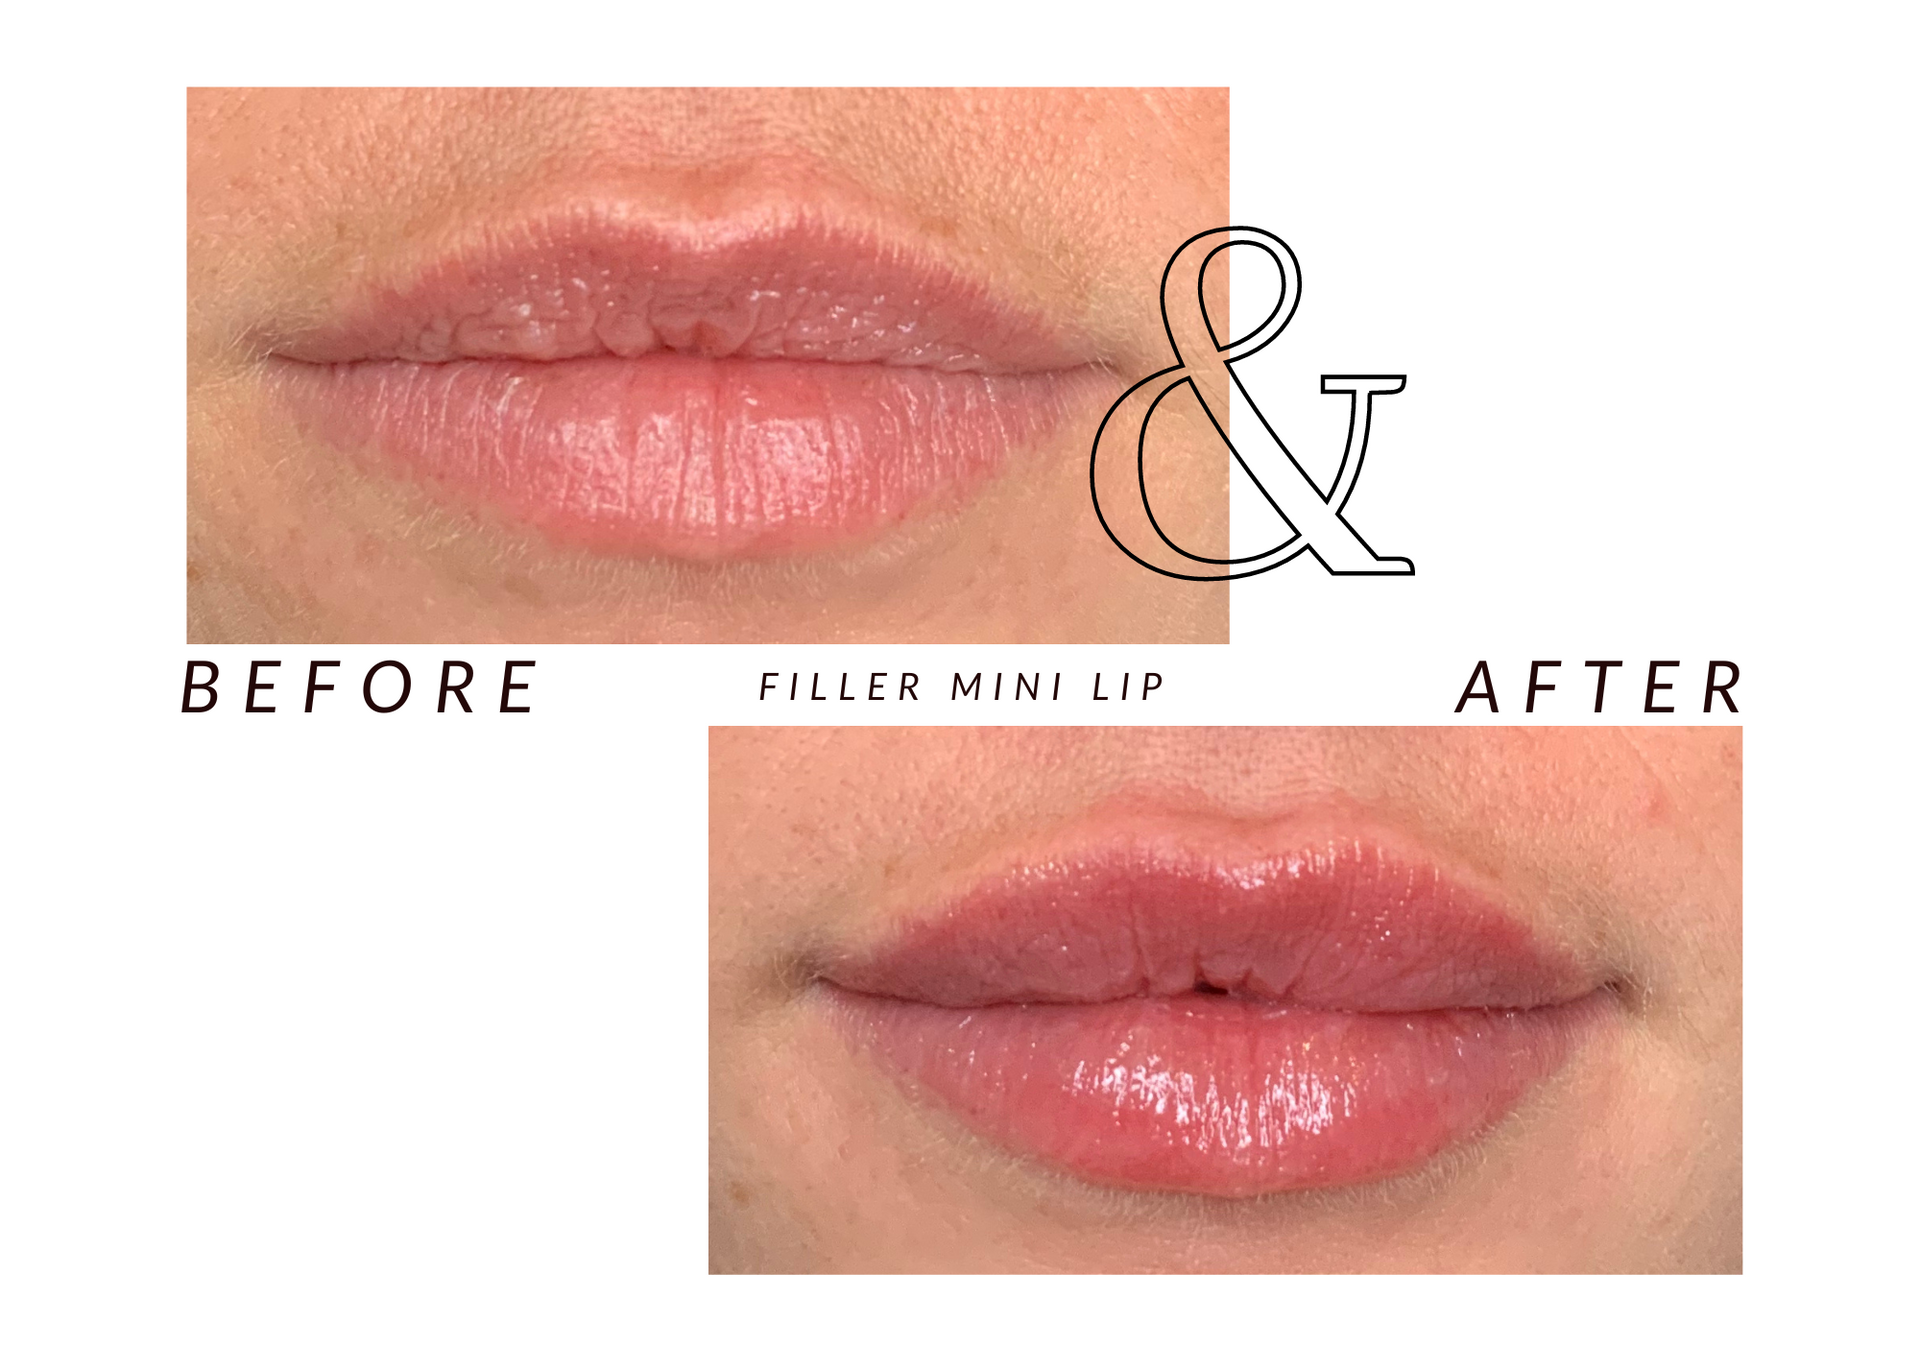 A picture of a woman 's lips before and after filler full lip enlargement